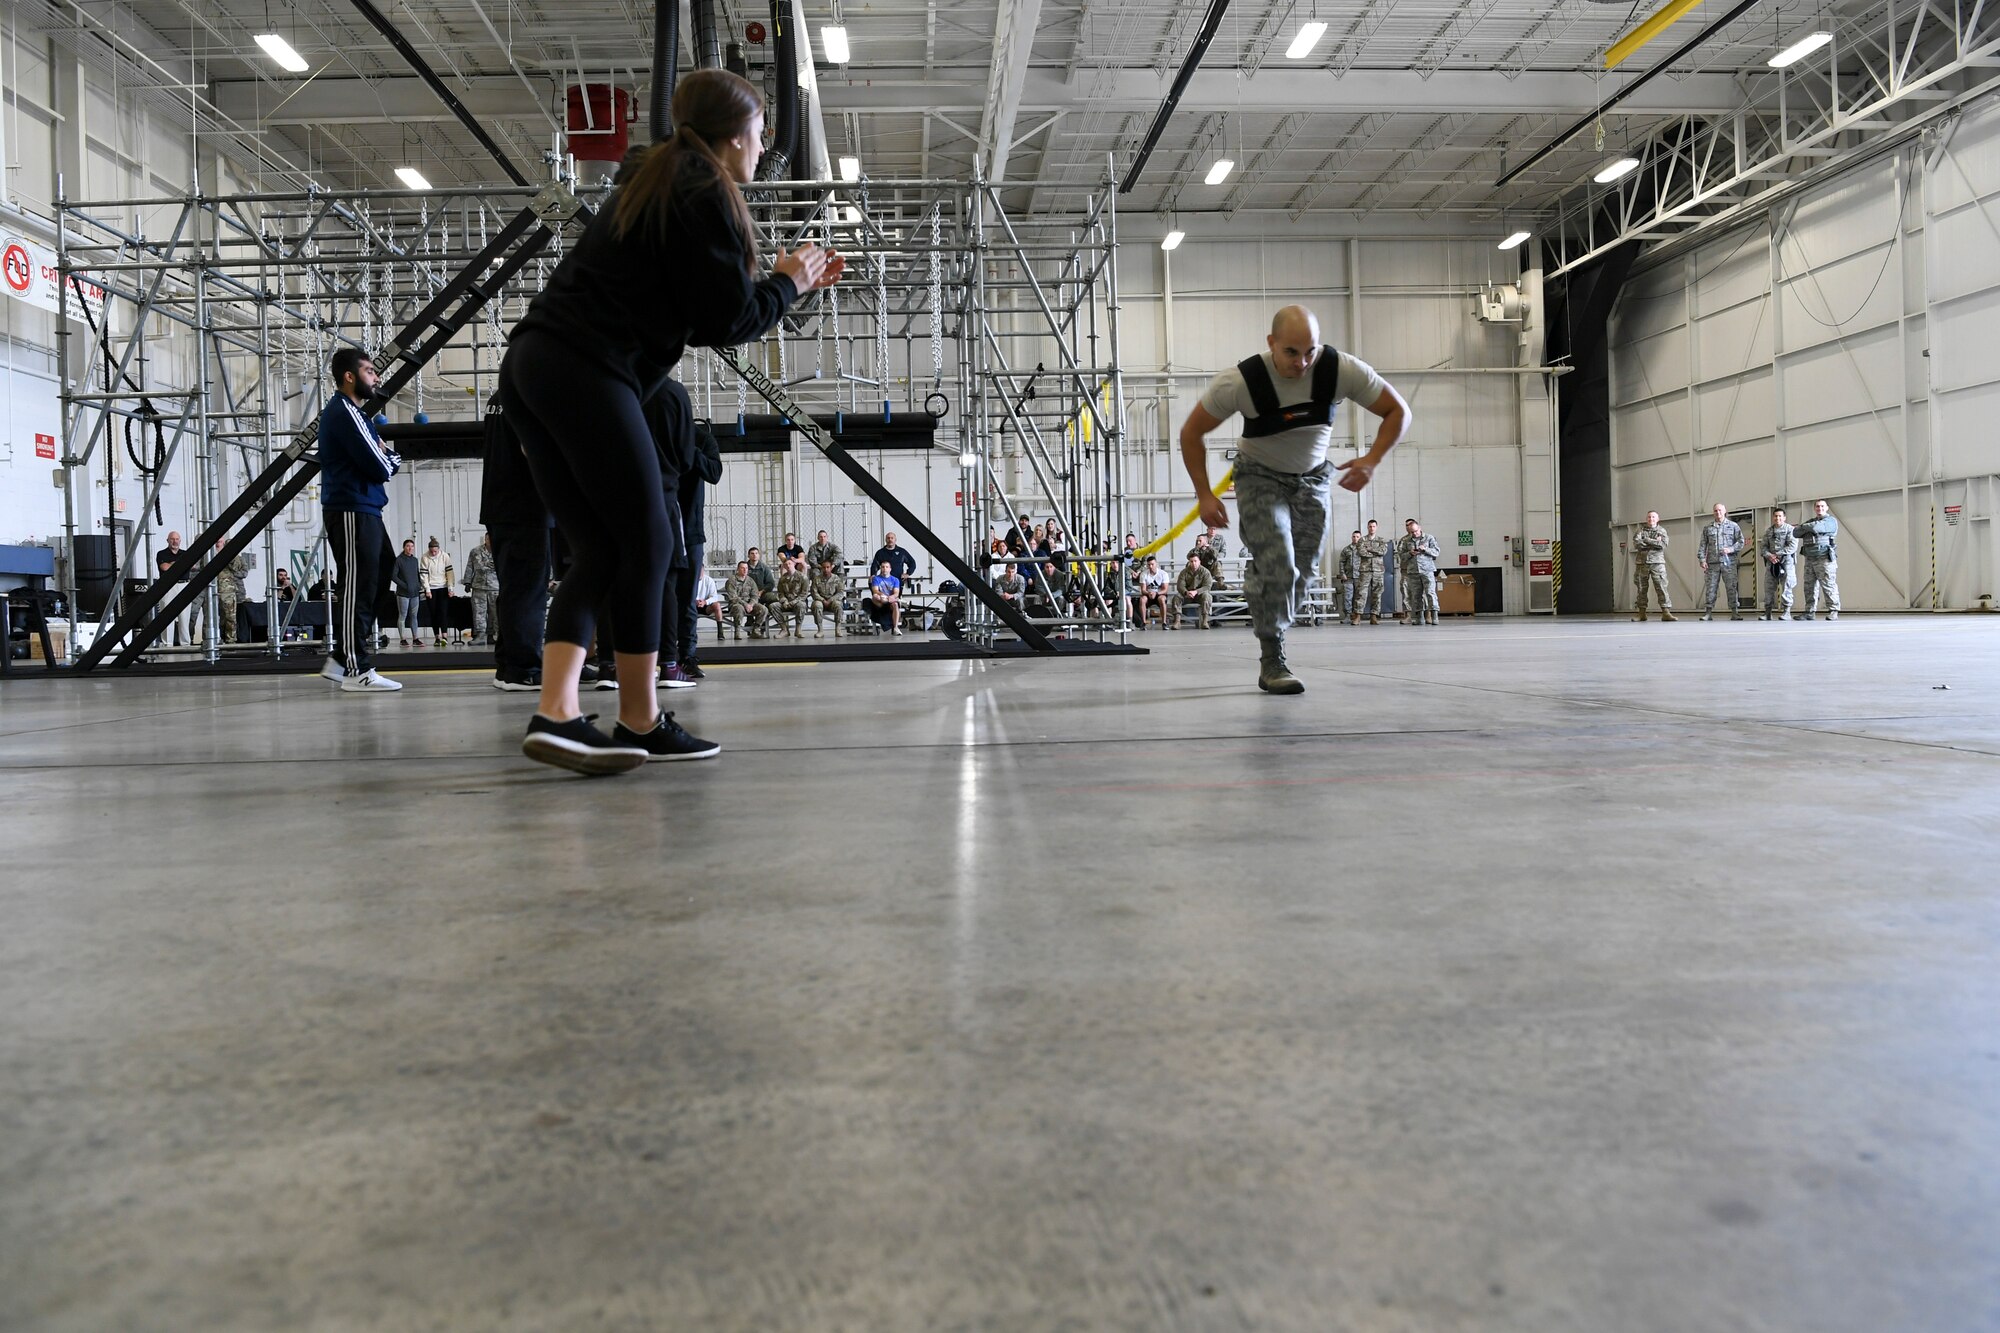 An Airman with the 911th Airlift Wing participates in a time challenge using the Alpha Warrior Battle Rig at the Pittsburgh International Airport Air Reserve Station, Pennsylvania, October 14, 2018. The battle rig is designed to meet all four of the Comprehensive Airman Fitness model's pillars: mental, physical, social and spiritual. (U.S. Air Force photo by Staff Sgt. Zachary Vucic)